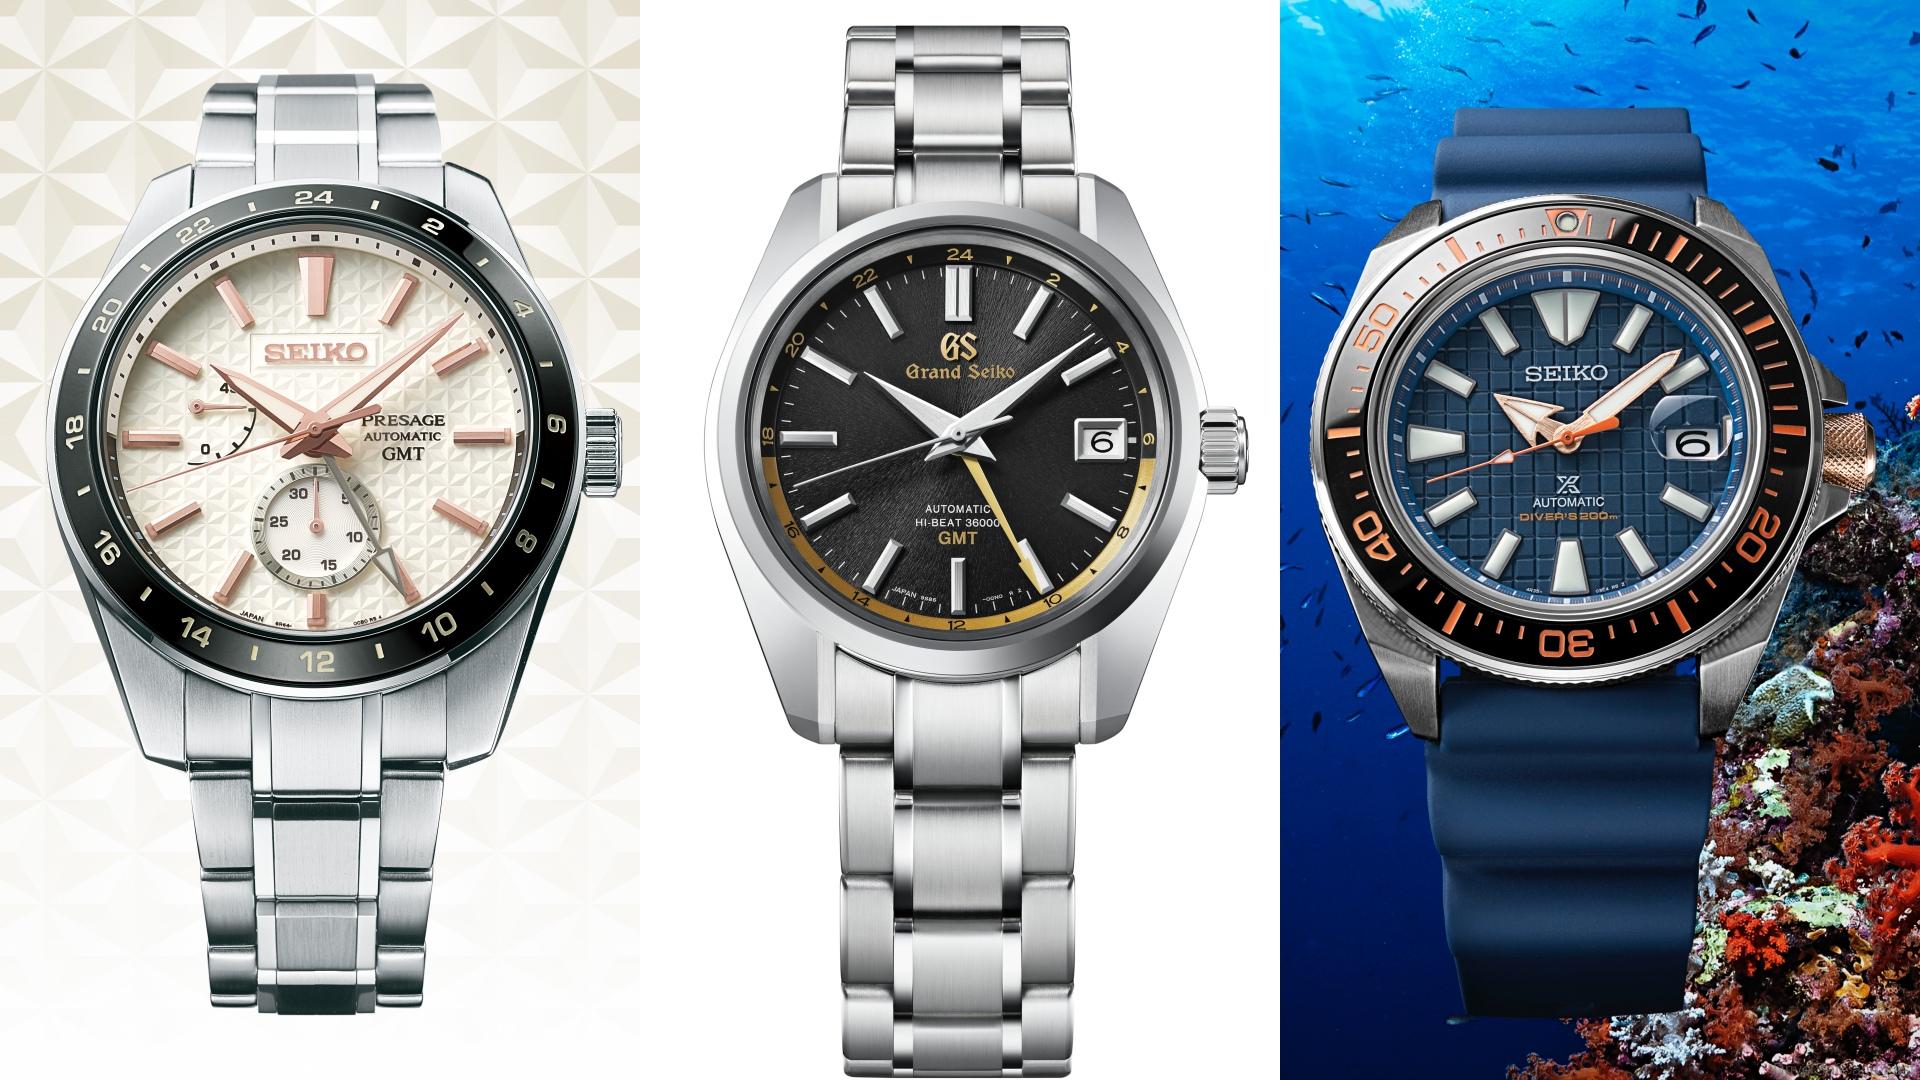 Regional Exclusive Timepieces From Grand Seiko and Seiko